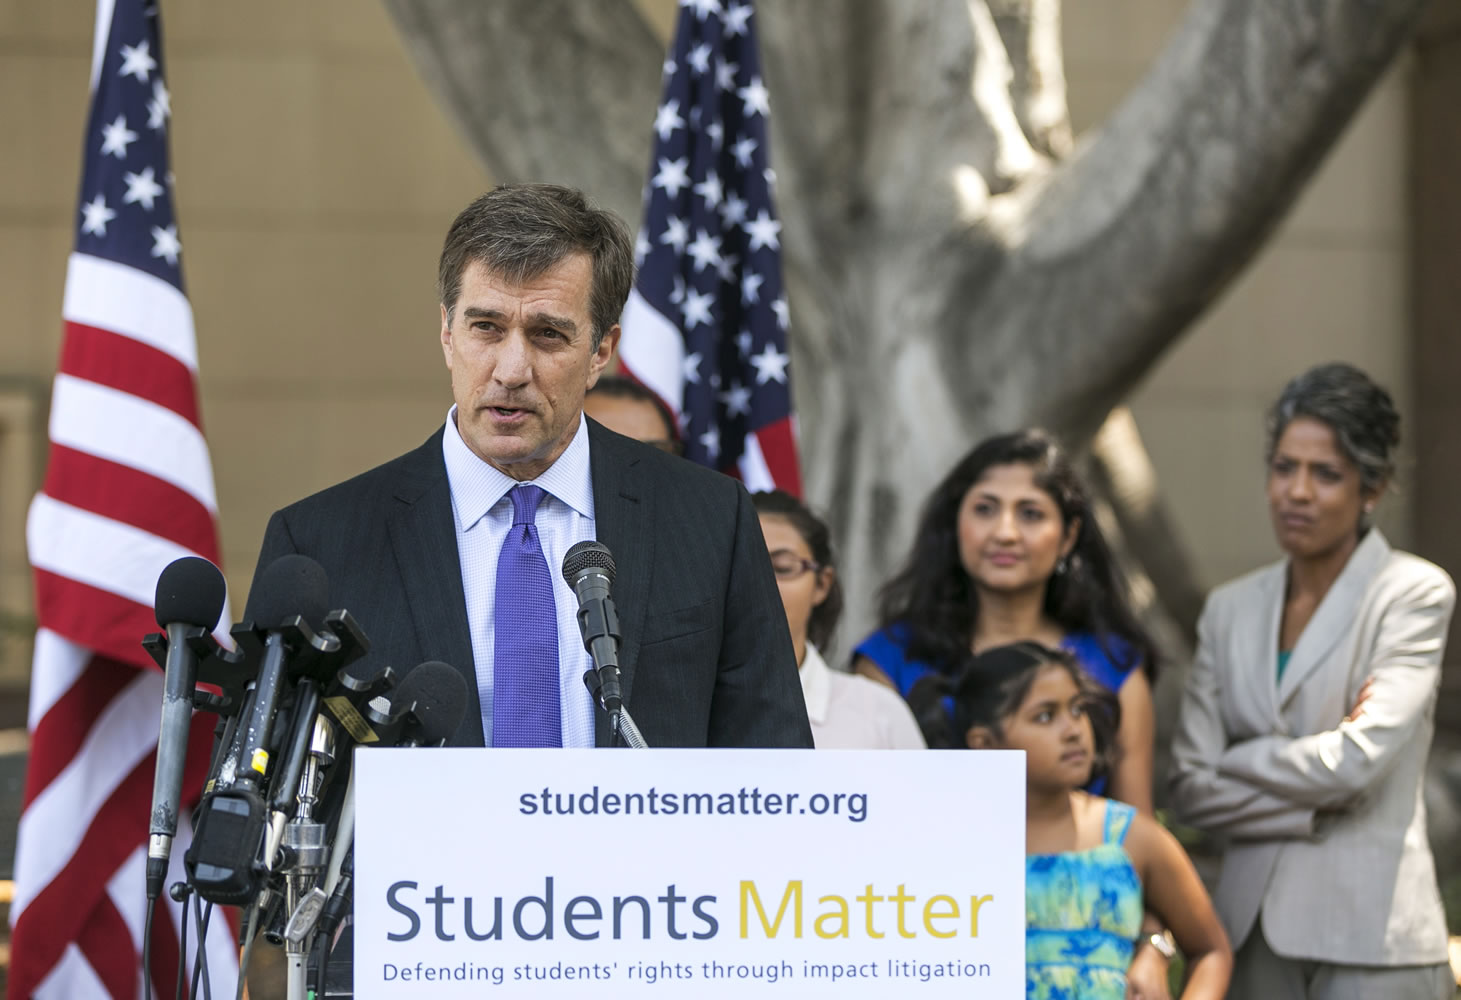 Silicon Valley entrepreneur and founder of Students Matter David Welch makes comments on the Vergara v. California lawsuit verdict in Los Angeles, Tuesday, June 10, 2014. A judge struck down tenure and other job protections for California's public school teachers as unconstitutional Tuesday, saying such laws harm students, especially poor and minority ones, by saddling them with bad teachers. In a landmark decision that could influence the gathering debate over tenure across the country, Los Angeles County Superior Court Judge Rolf Treu cited the historic case of Brown v. Board of Education in ruling that students have a fundamental right to equal education.